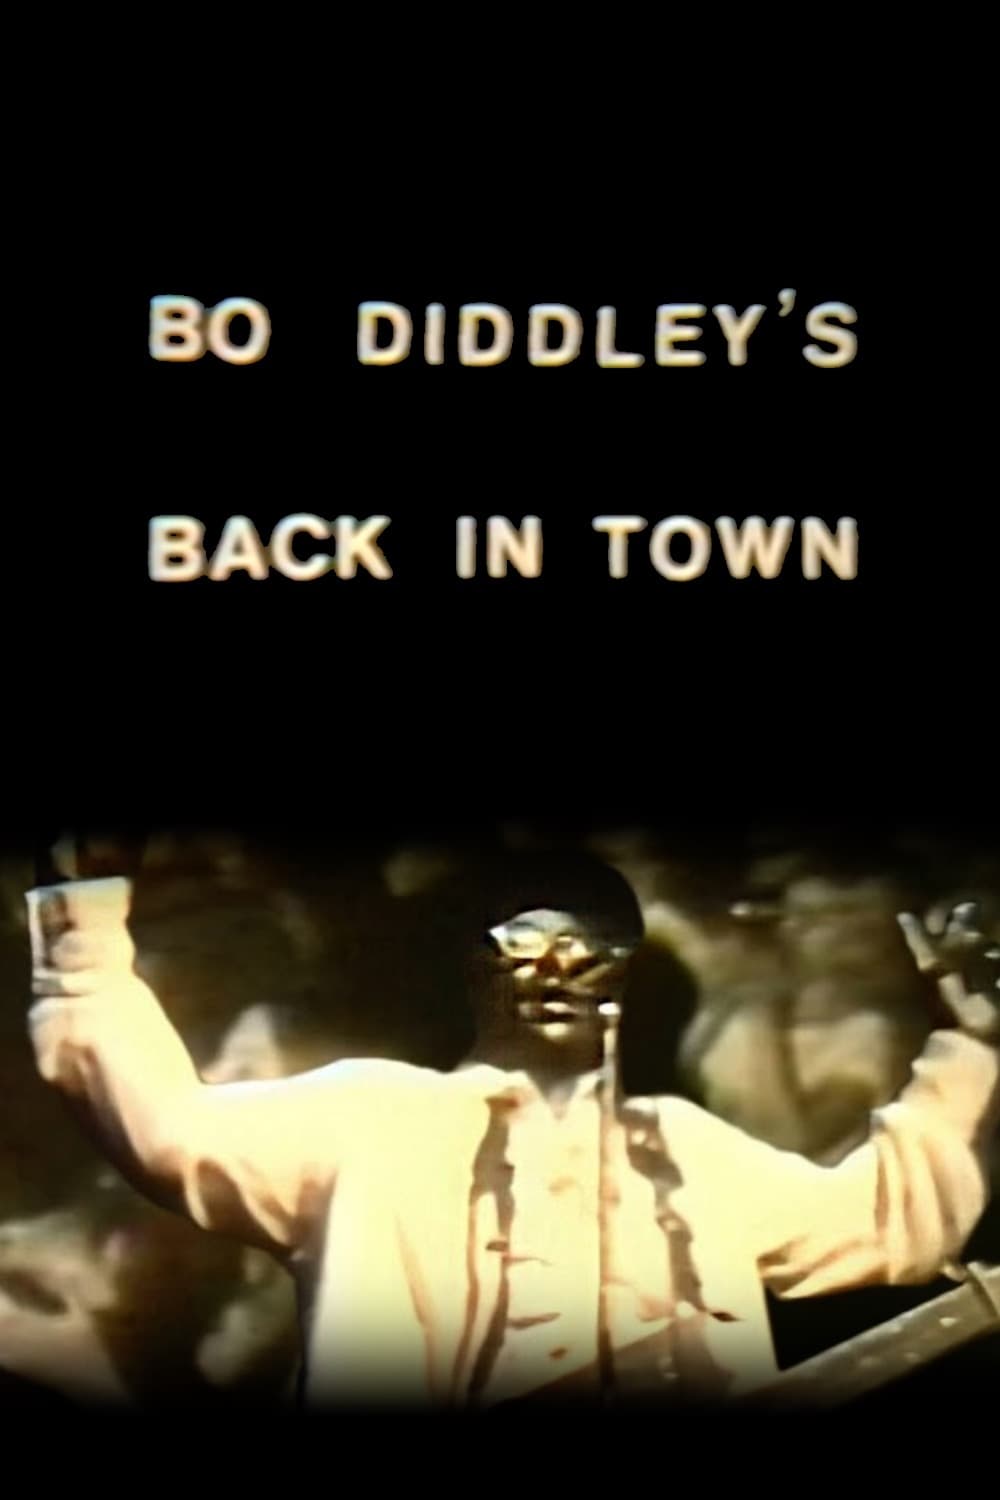 Bo Diddley's Back in Town